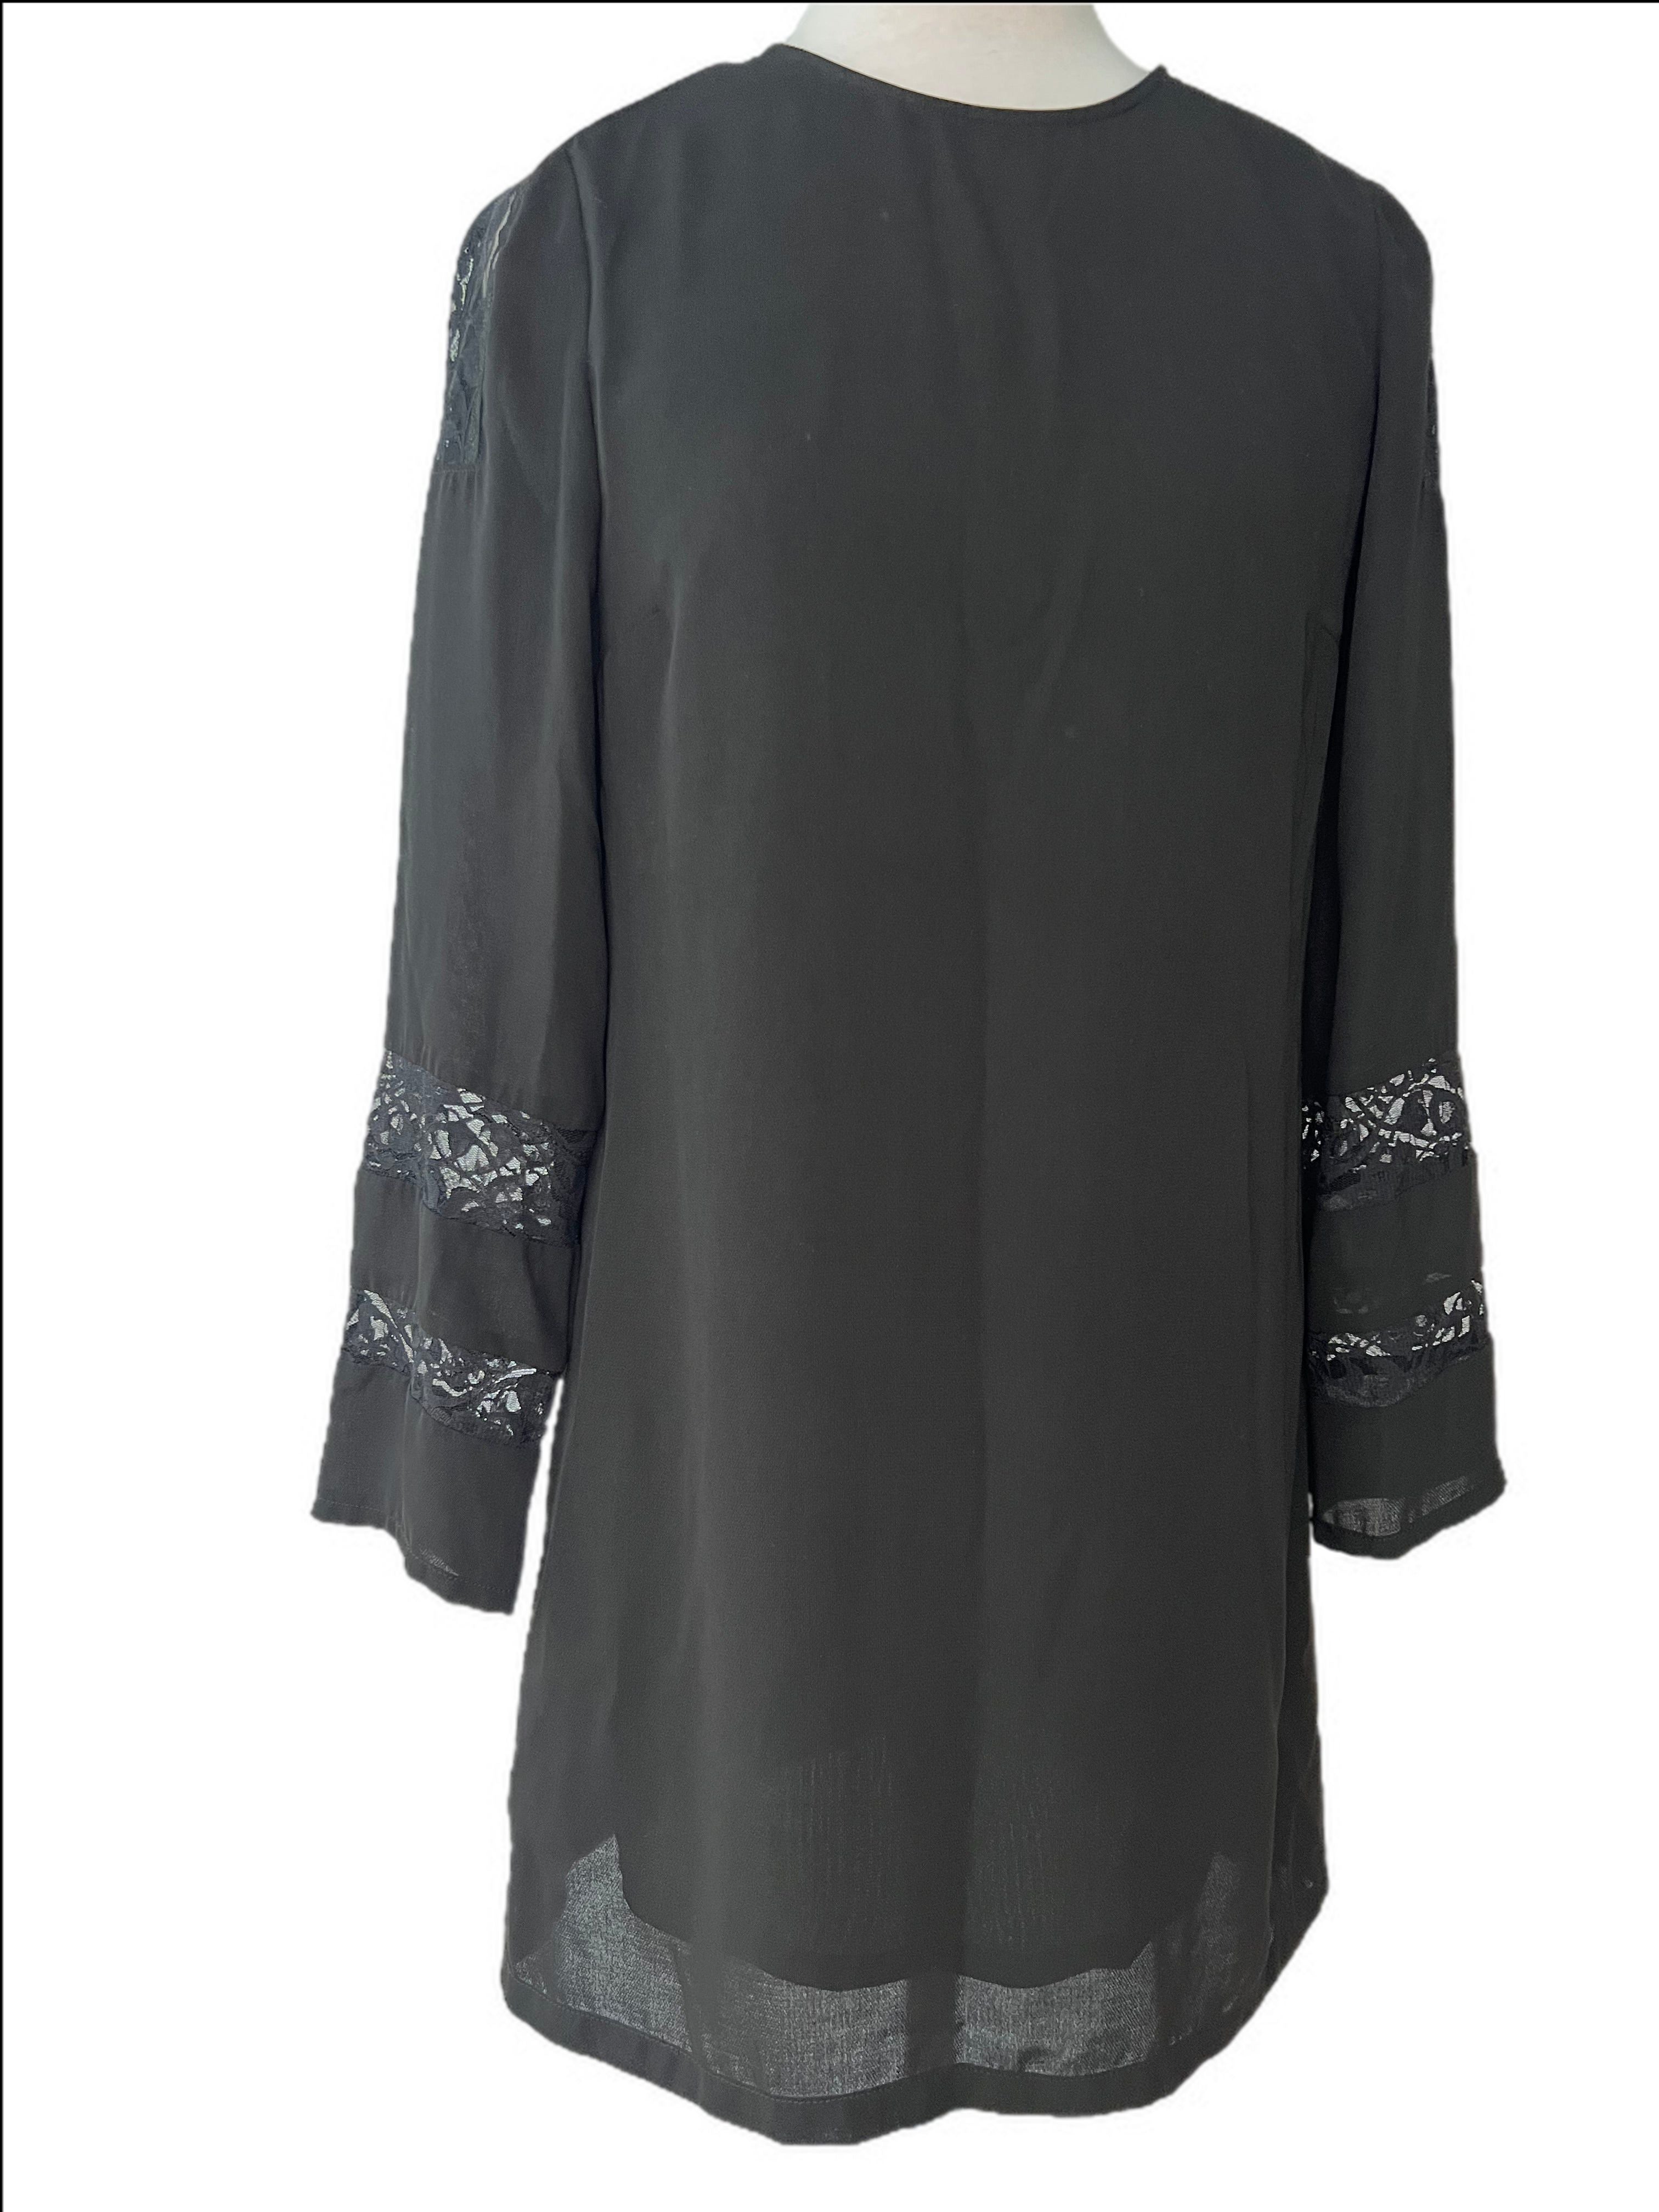 Shift dress with lace detail in sleeves